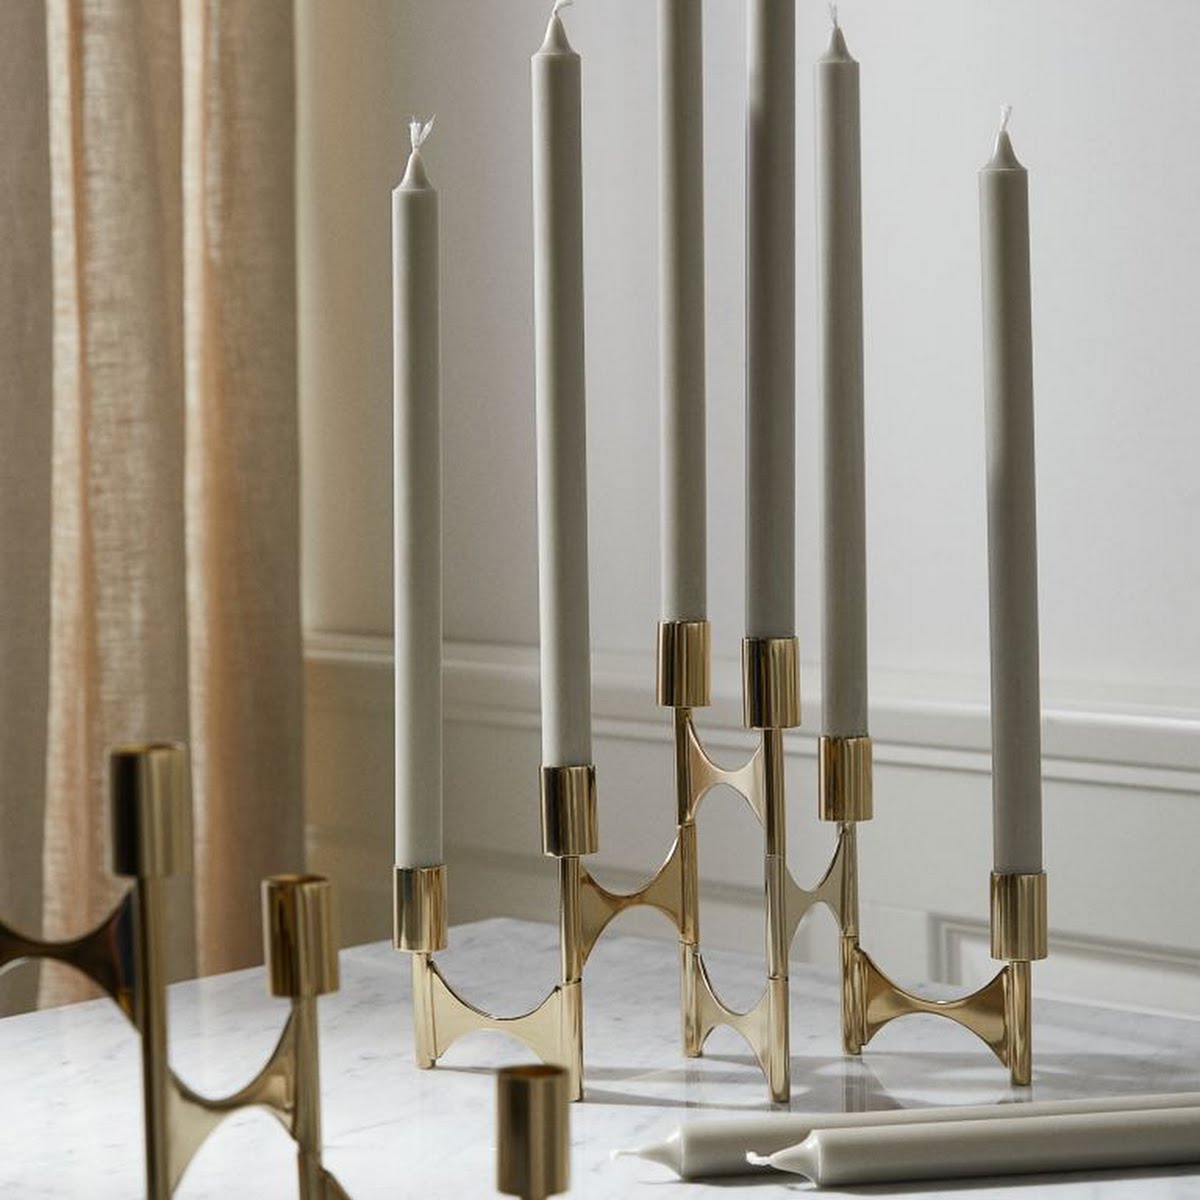 Metal candle holder, €44.99, H&M